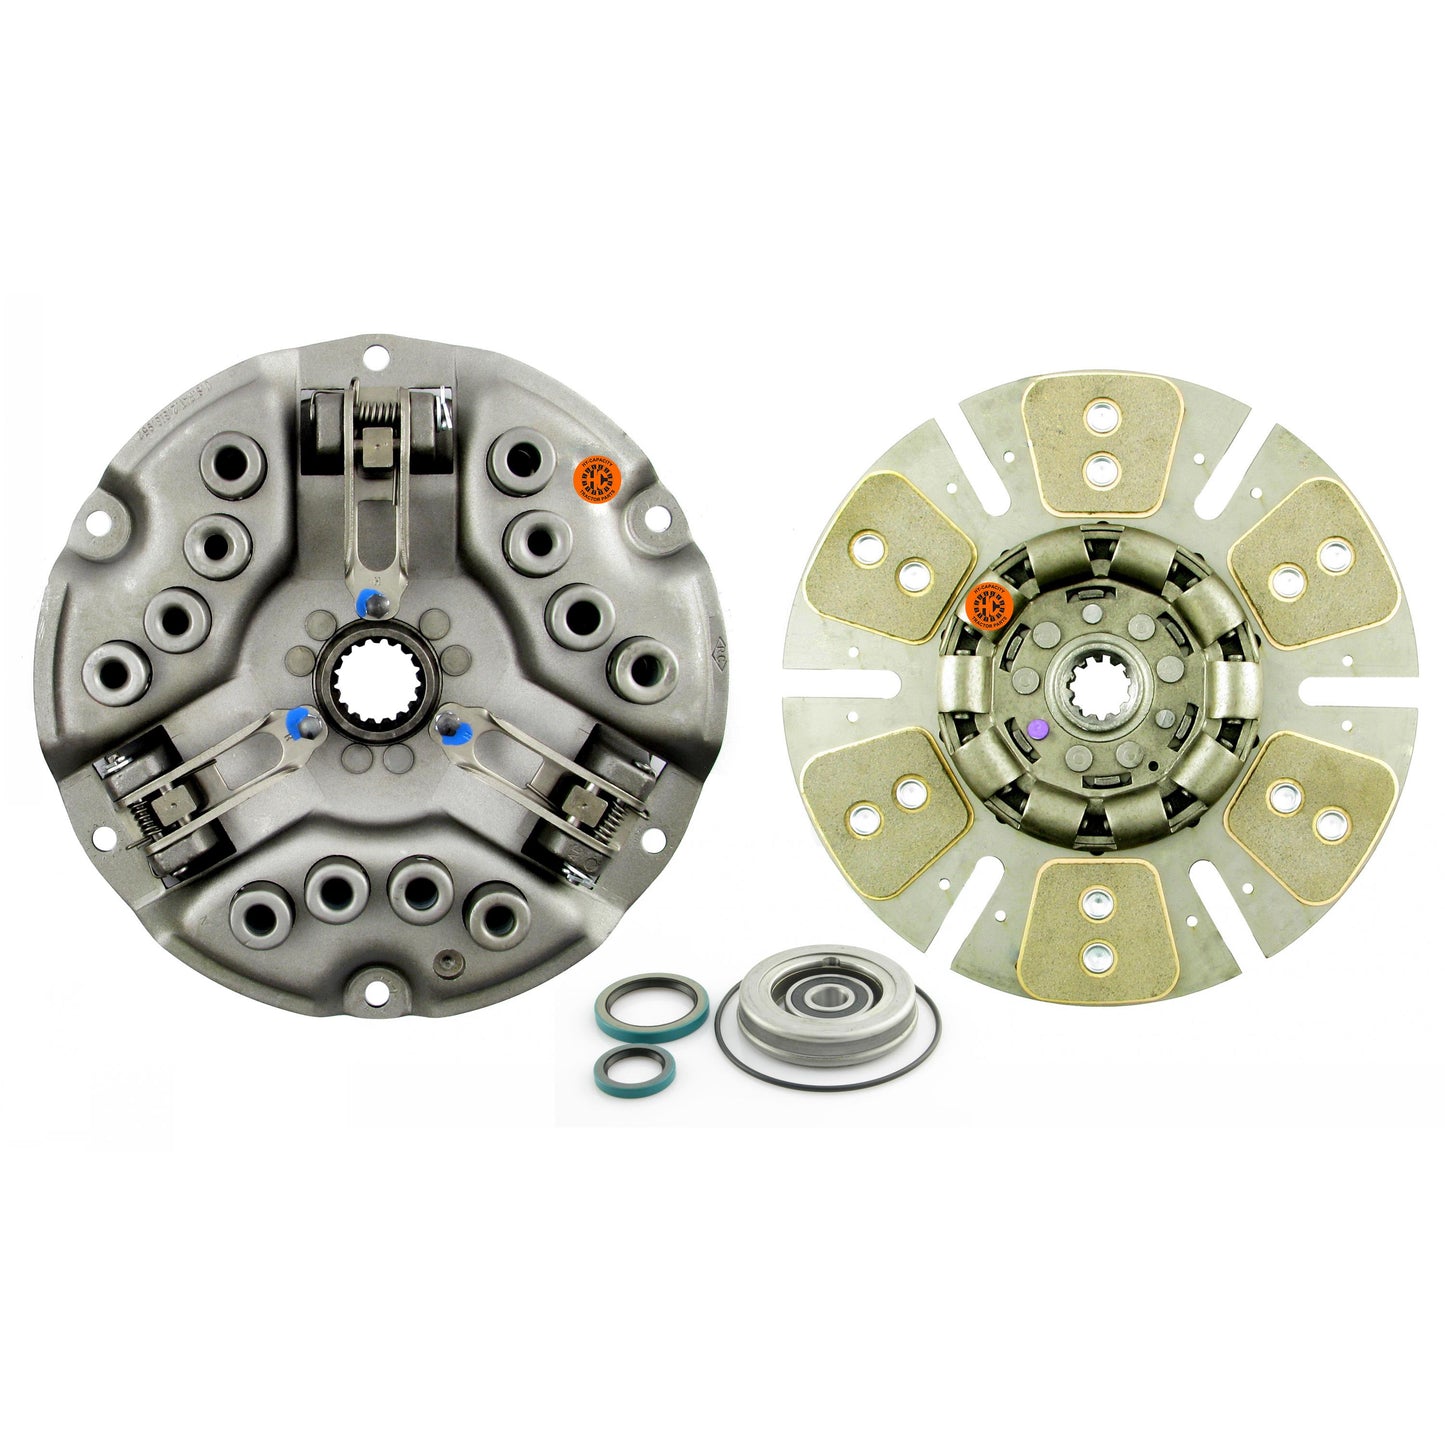 405300 KIT 12" Single Stage Clutch Kit, w/ 6 Large Pad Disc, Bearings & Seals - New